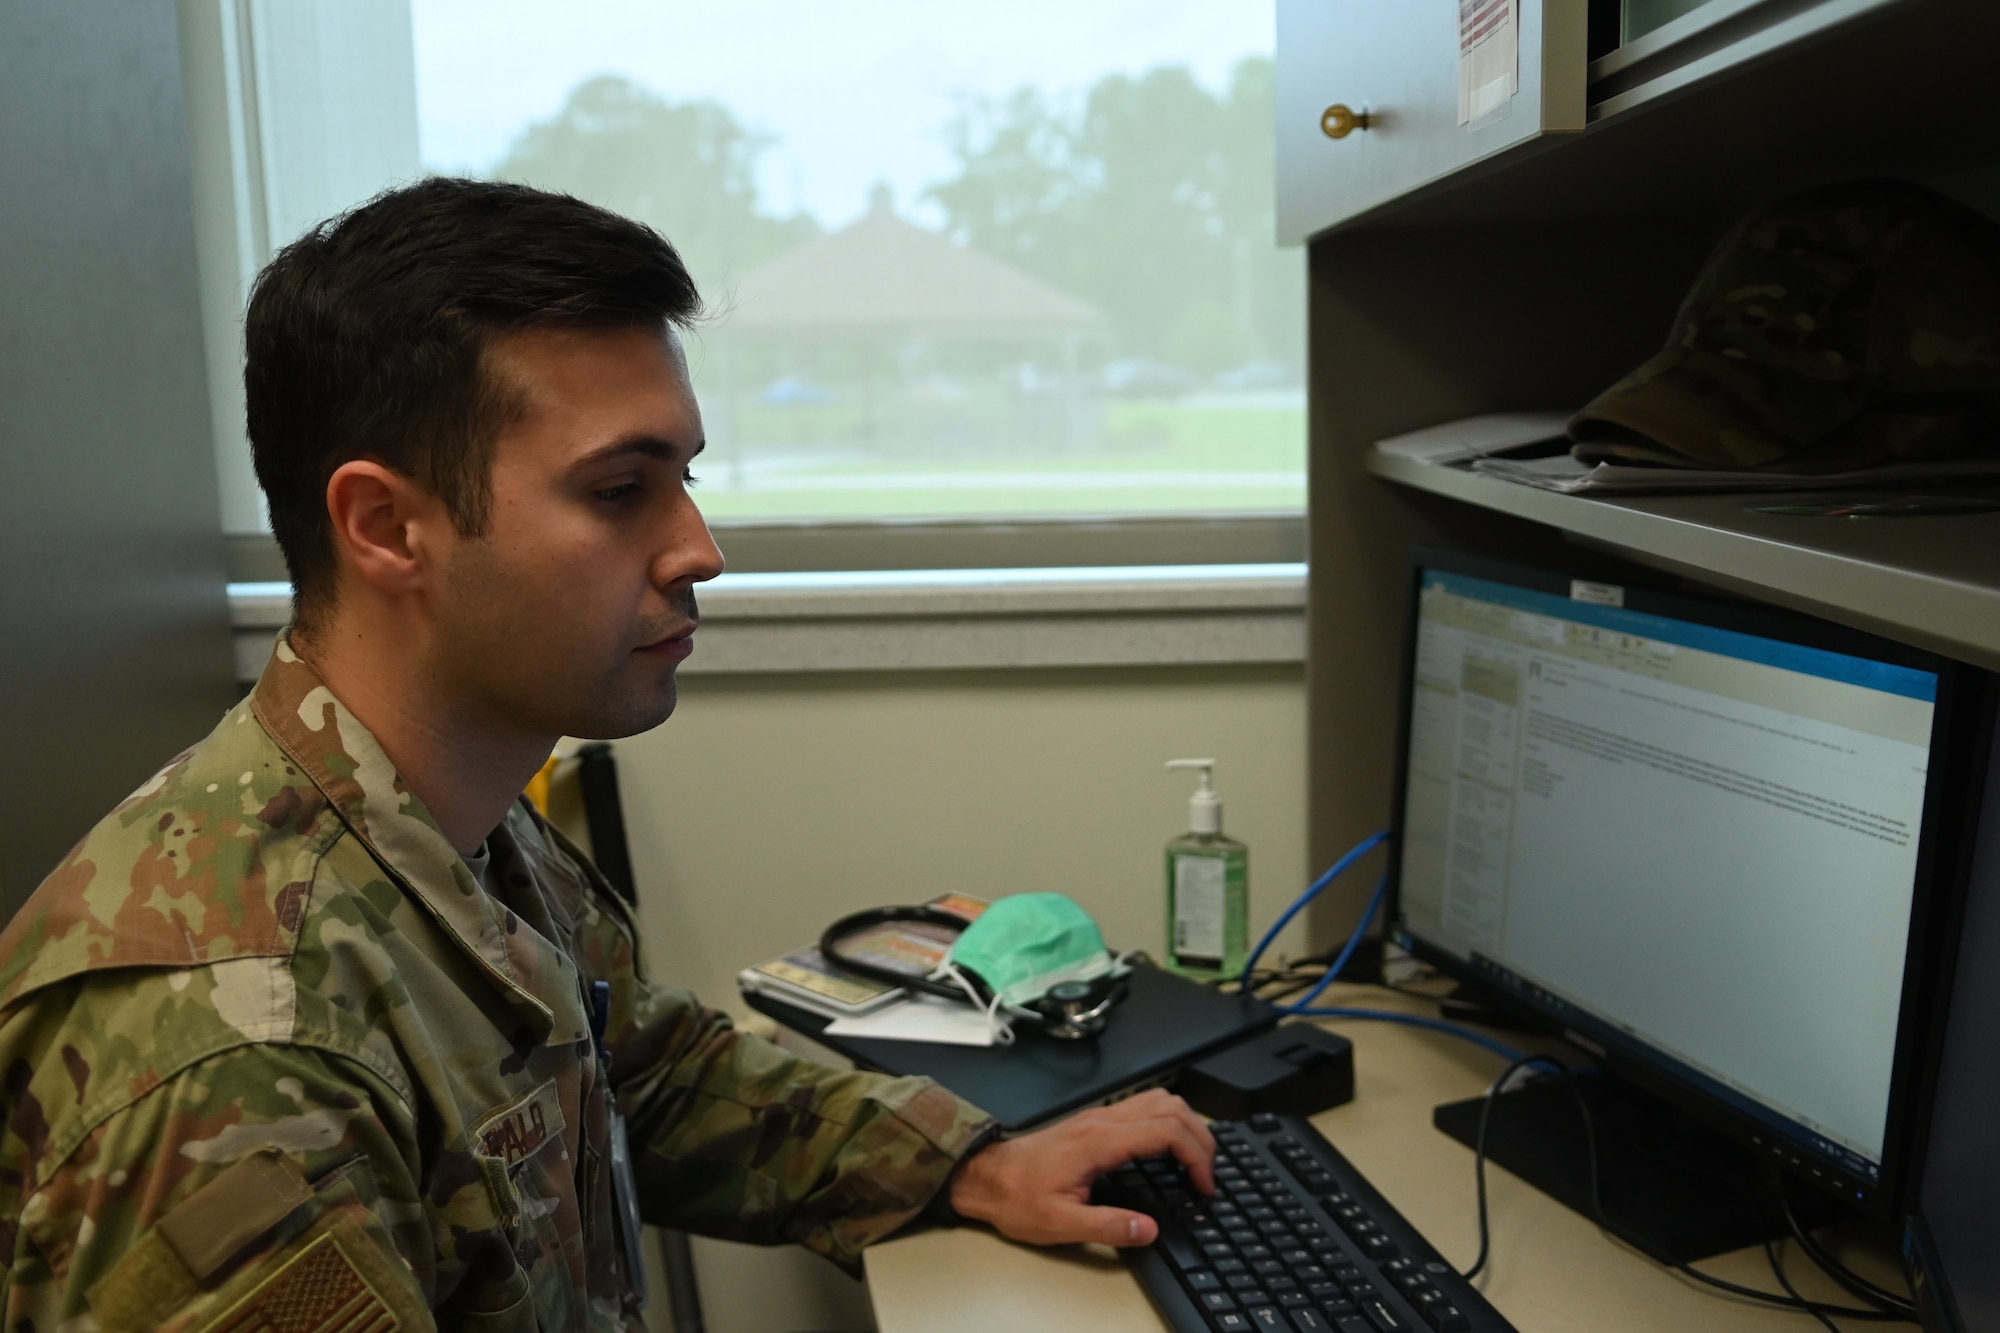 Staff Sgt. Jon Paul Fitzgerald, 336th Fighter Squadron independent duty medical technician, works on a computer at Seymour Johnson Air Force Base, North Carolina, July 13, 2021. IDMT’s are able to diagnose and treat active duty members within their established protocols. (U.S. Air Force Photo by Airman 1st Class David Lynn)